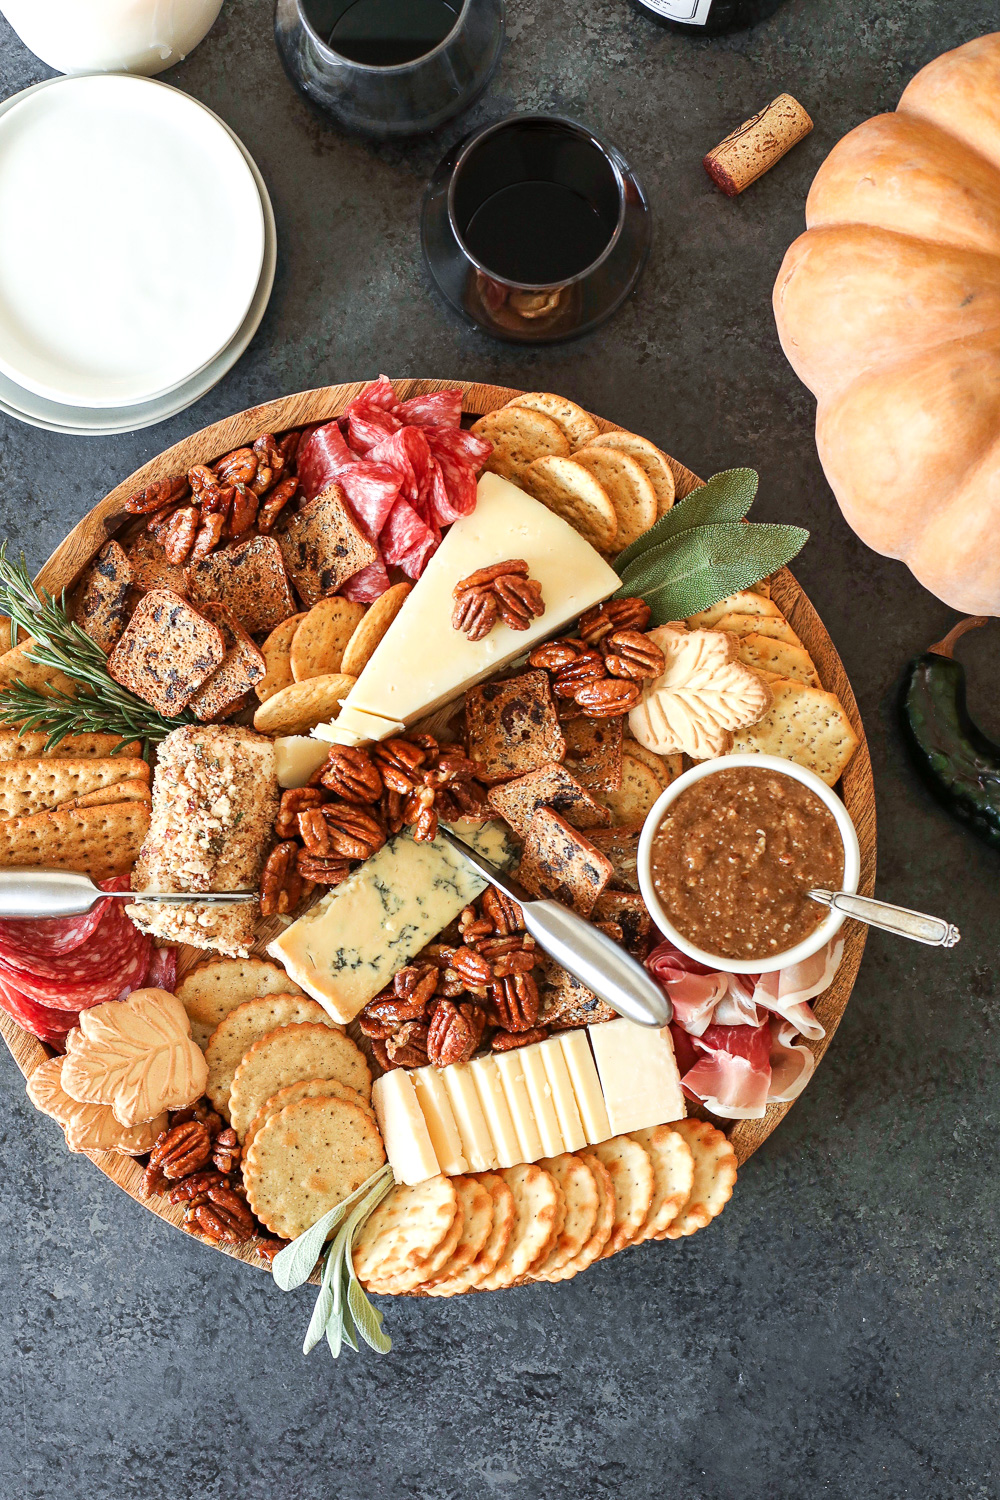 This Pecan-Packed Holiday Charcuterie Board has Maple Sage Pecans, a Rosemary Pecan Crusted Goat Cheese and a Honey Cinnamon Pecan spread that will wow any crowd this holiday!